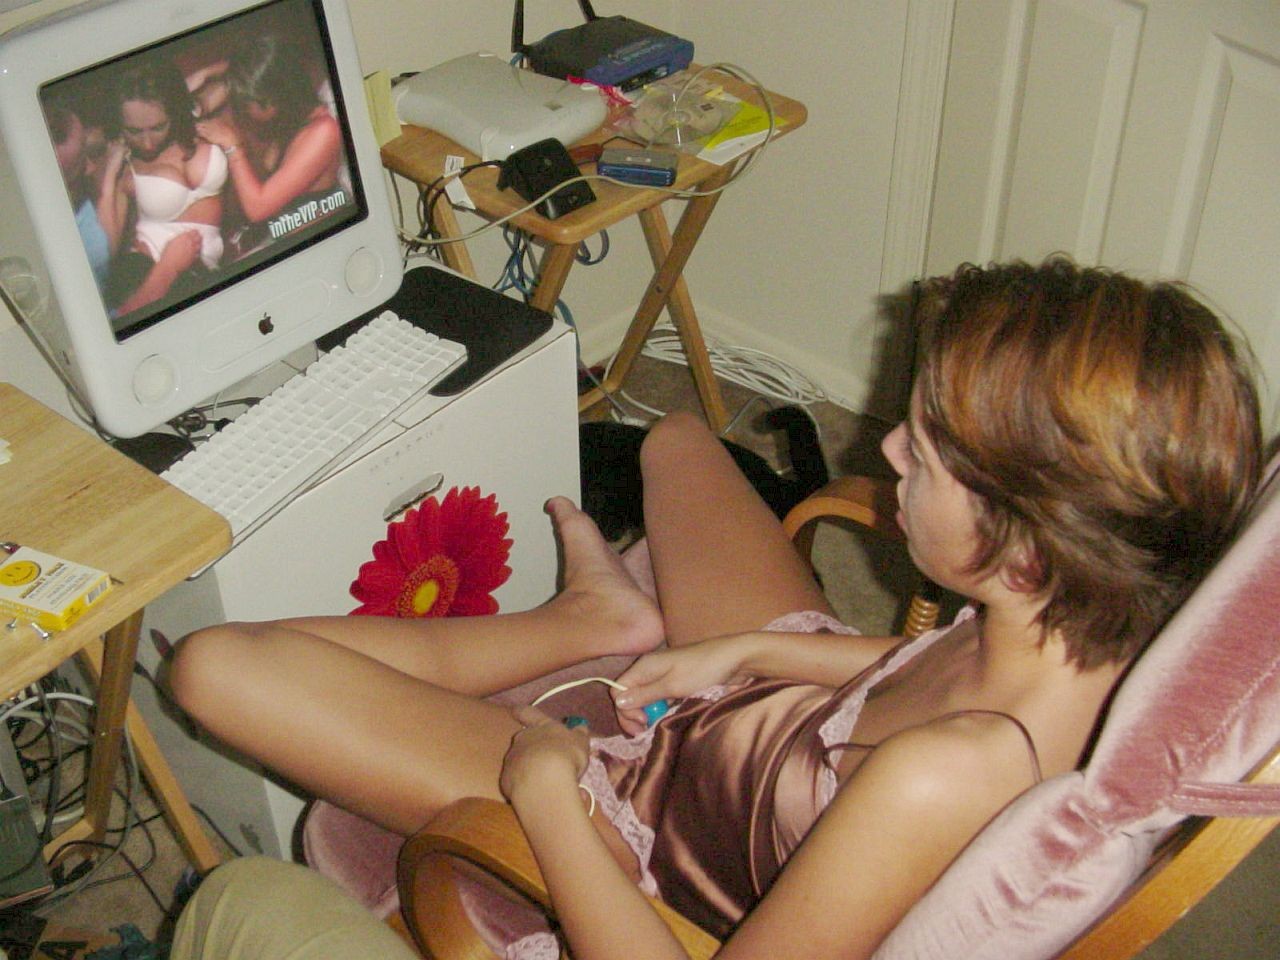 Amateur wife watching porn Sexy pictures website photo